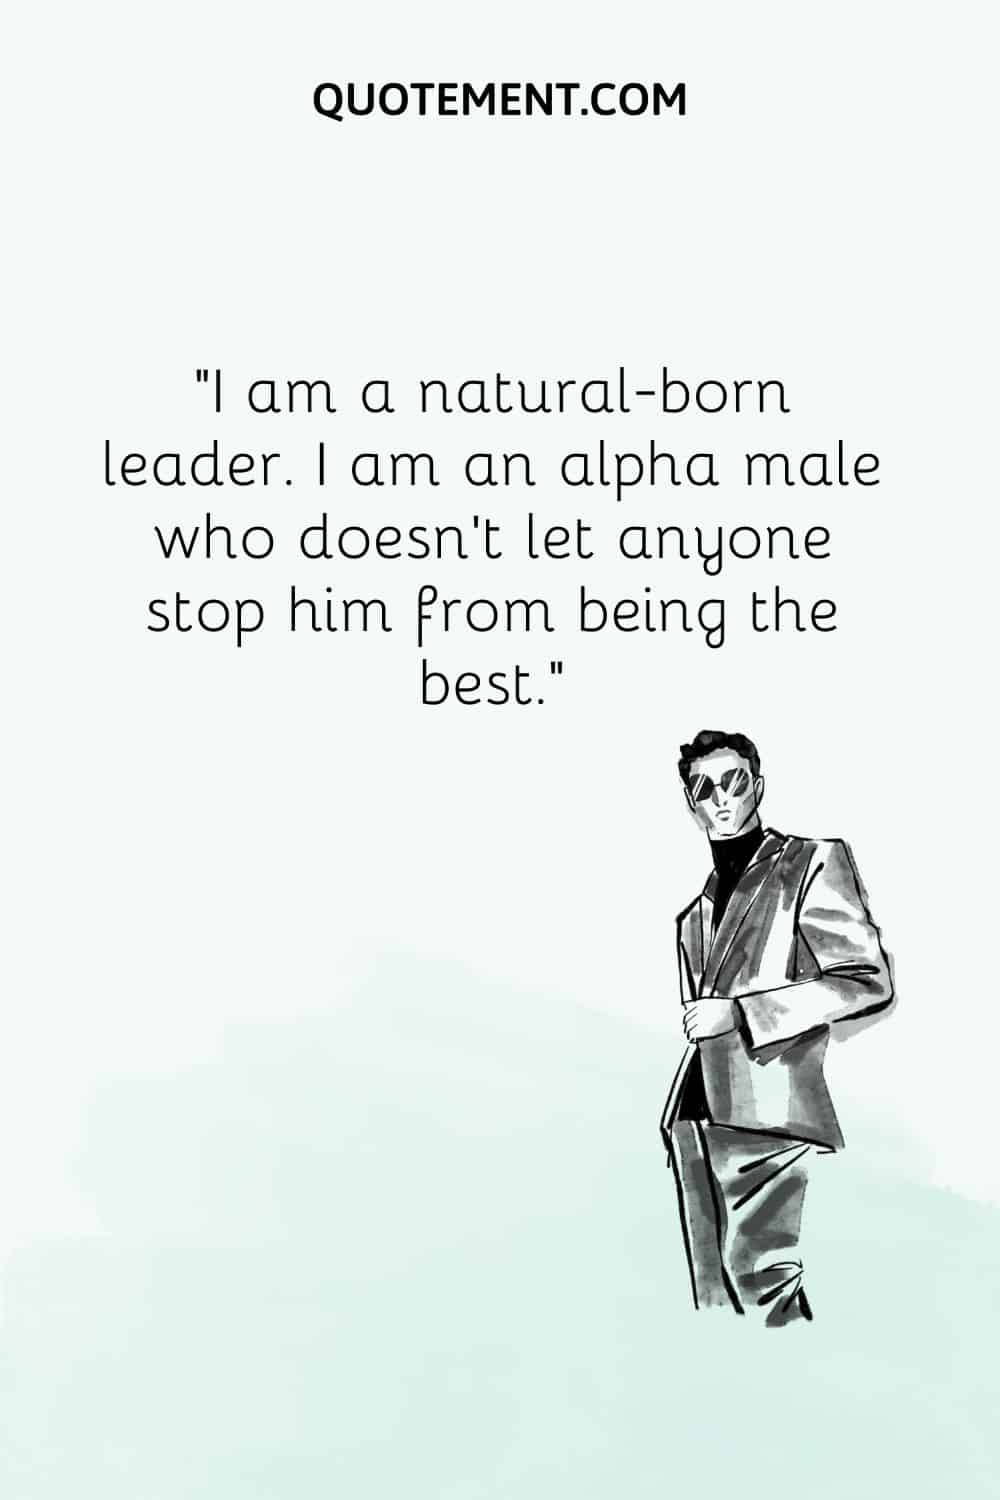 I am a natural-born leader. I am an alpha male who doesn’t let anyone stop him from being the best